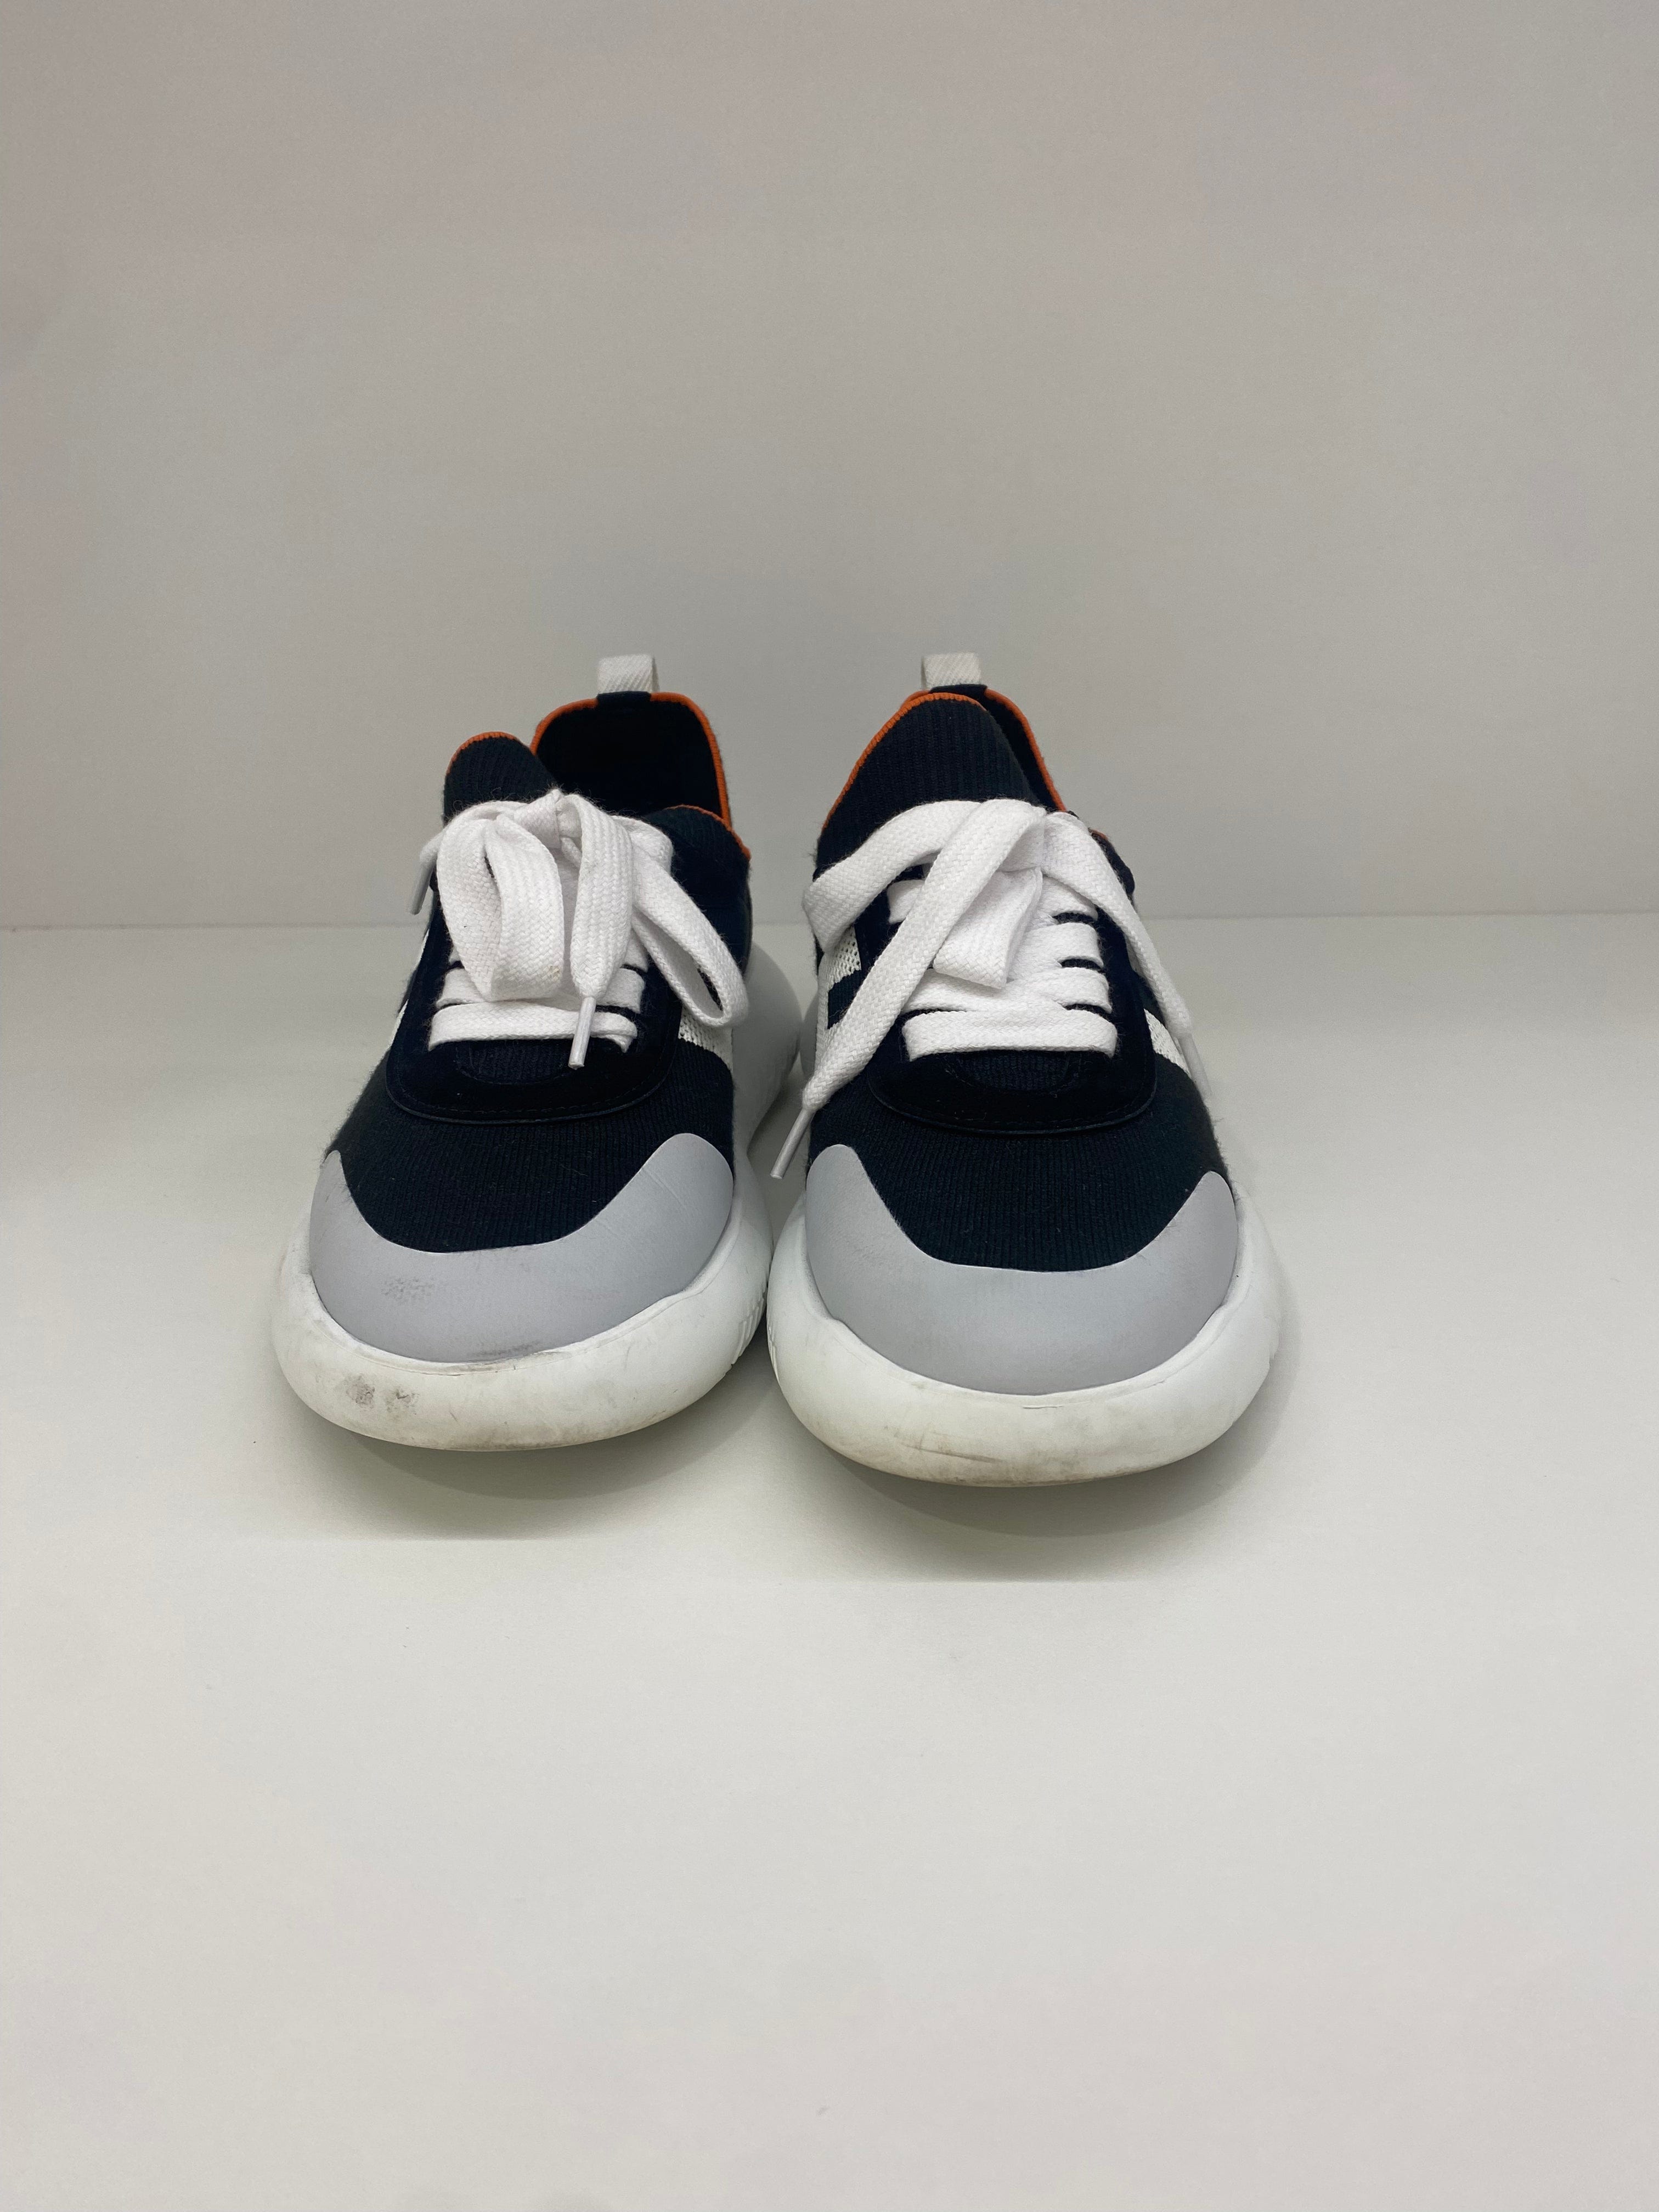 PH Luxury Consignment Hermes Black and White Sneakers - Size 36